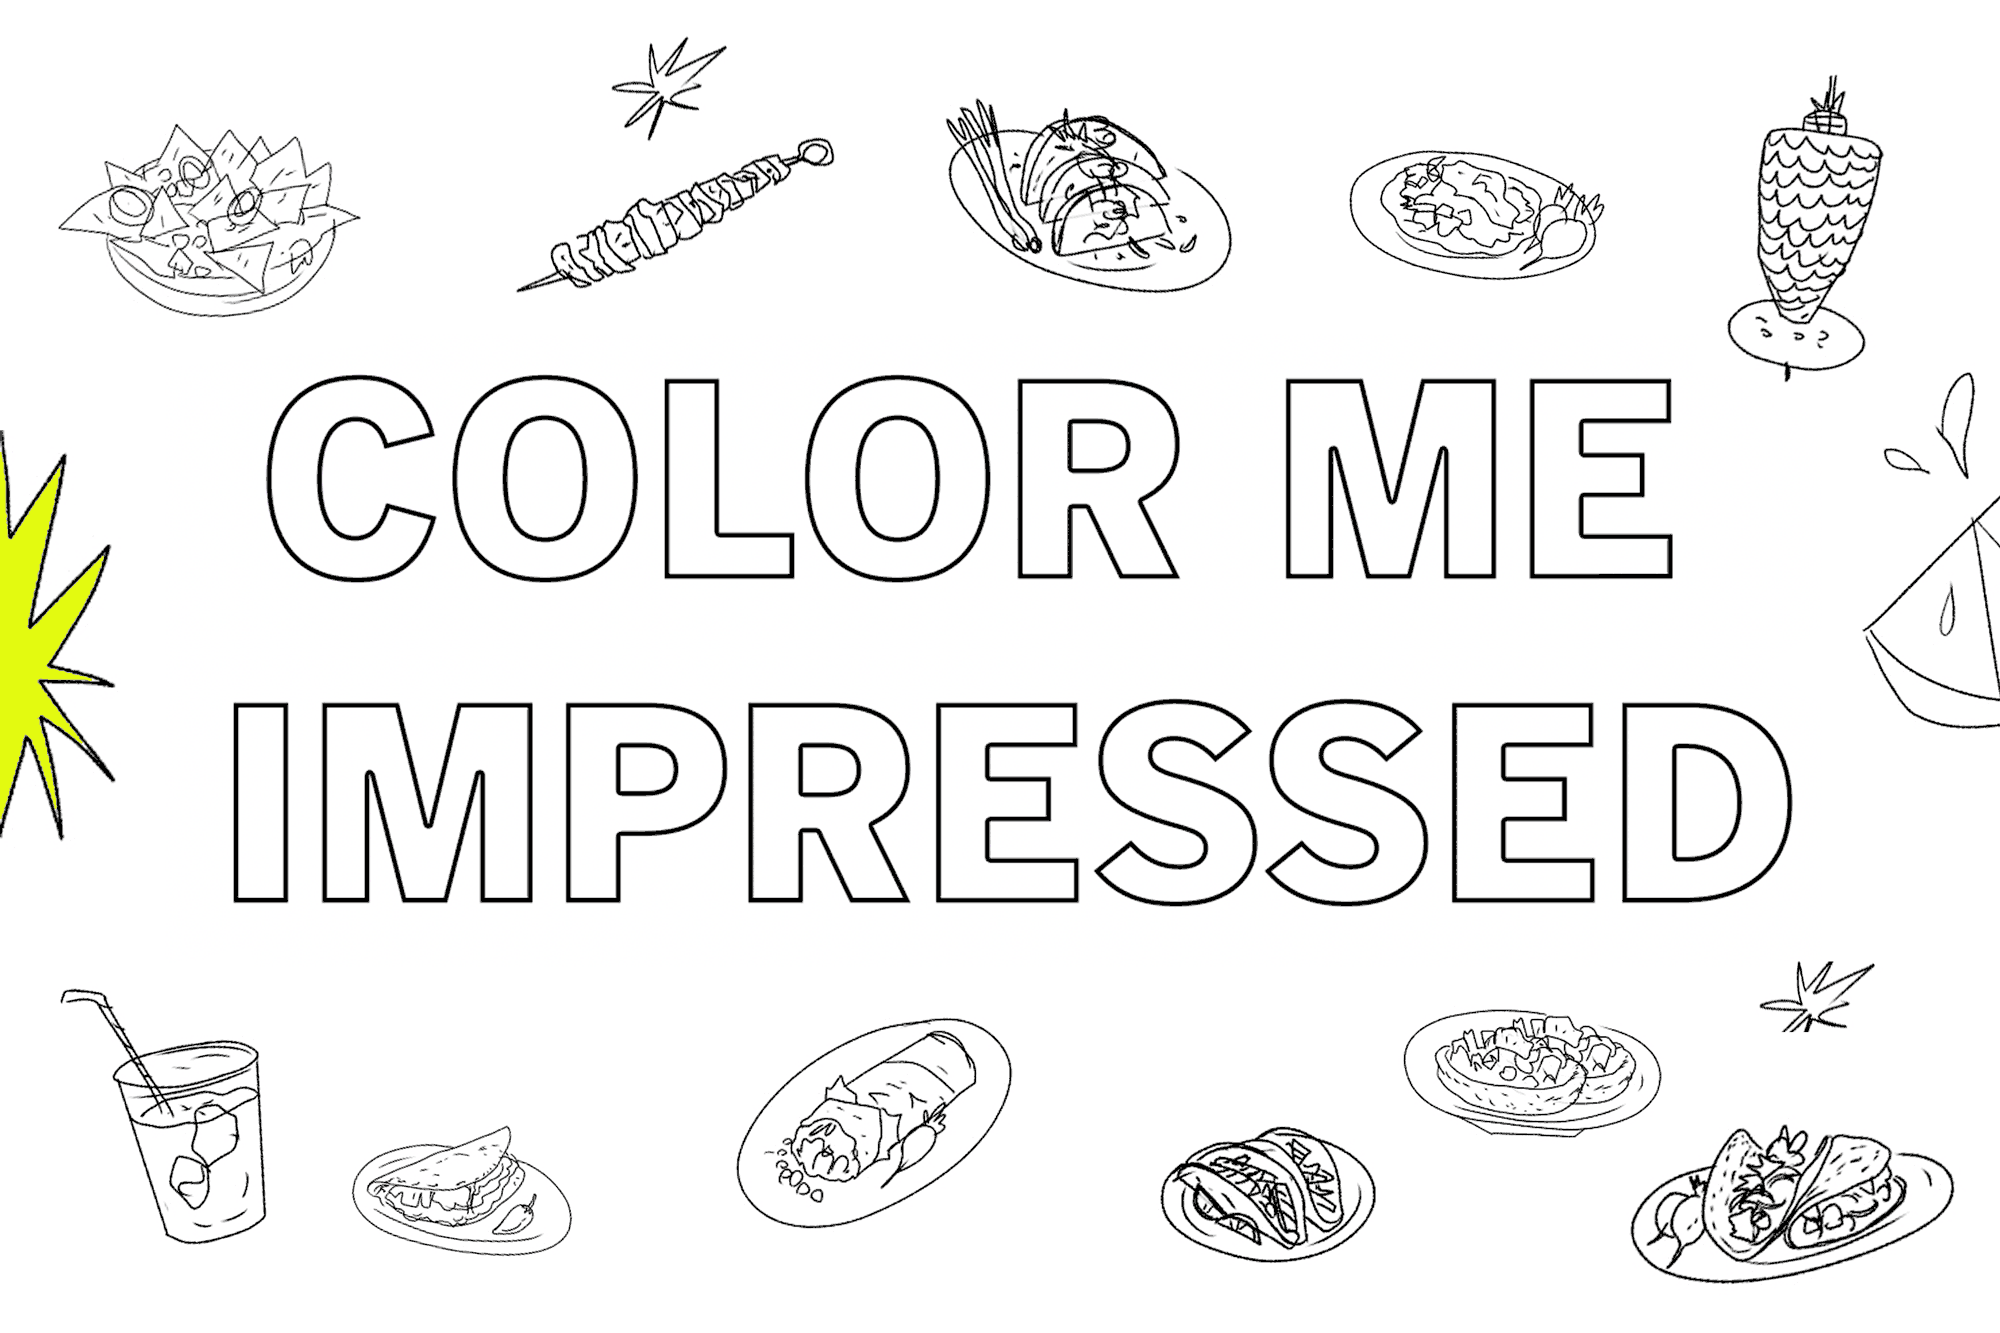 These are some of our favorite illustrations we've printed in the L.A. Times Food section. Download and print them out. Add some color, have some fun. Take care of yourselves and each other.